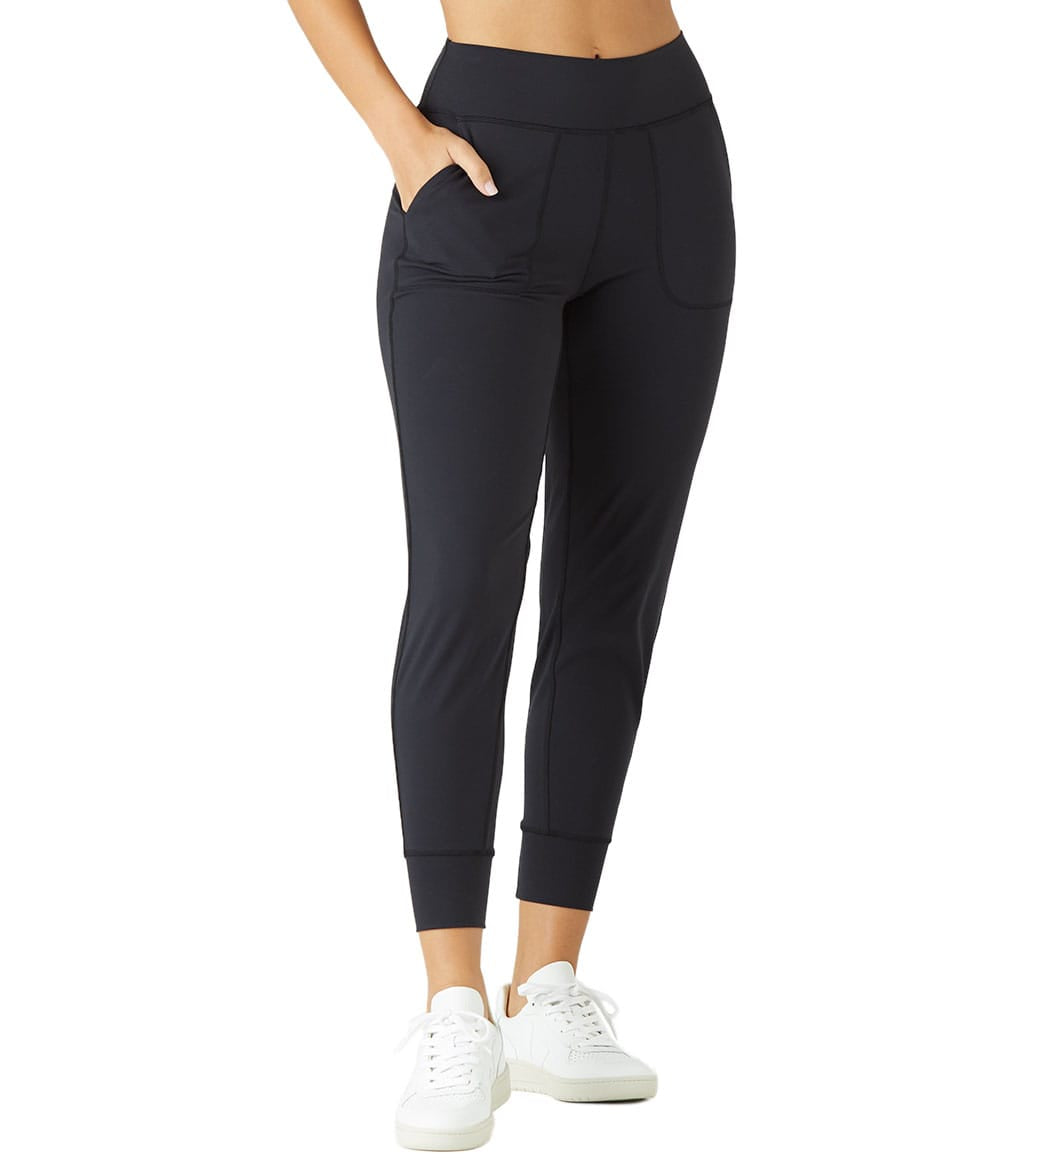 Glyder Pure 7/8 Yoga Leggings at YogaOutlet.com - Free Shipping